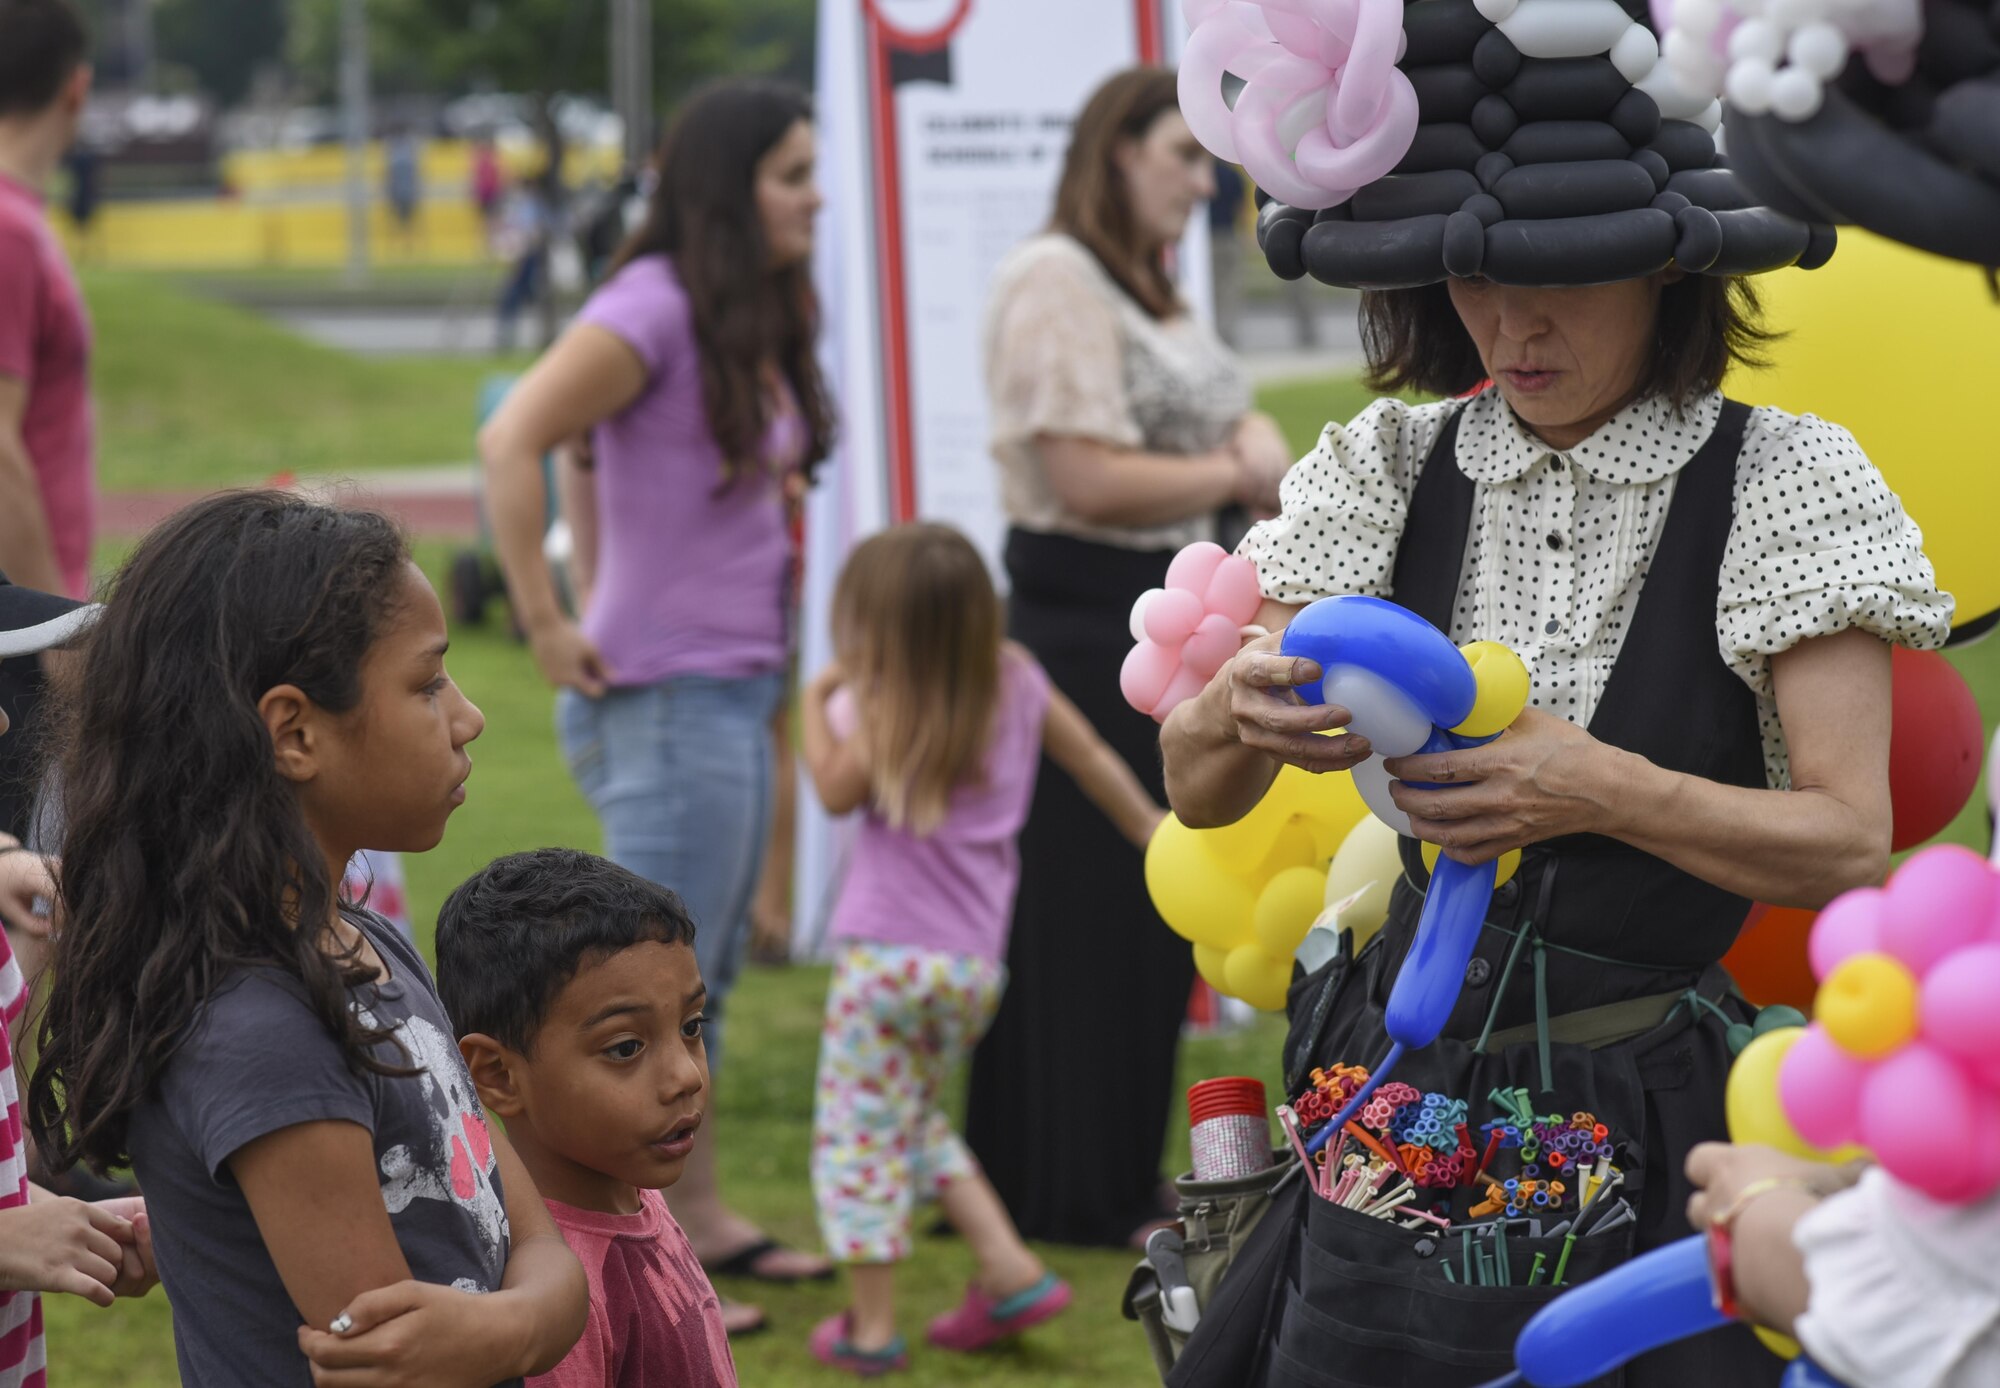 A balloon artist creates a balloon animal for children during Celebrate America at Yokota Air Base, Japan, July 2, 2015. Celebrate America is hosted every year to celebrate America’s Independence Day and enhance esprit de corps. (U.S. Air Force photo by Senior Airman Michael Washburn/Released)